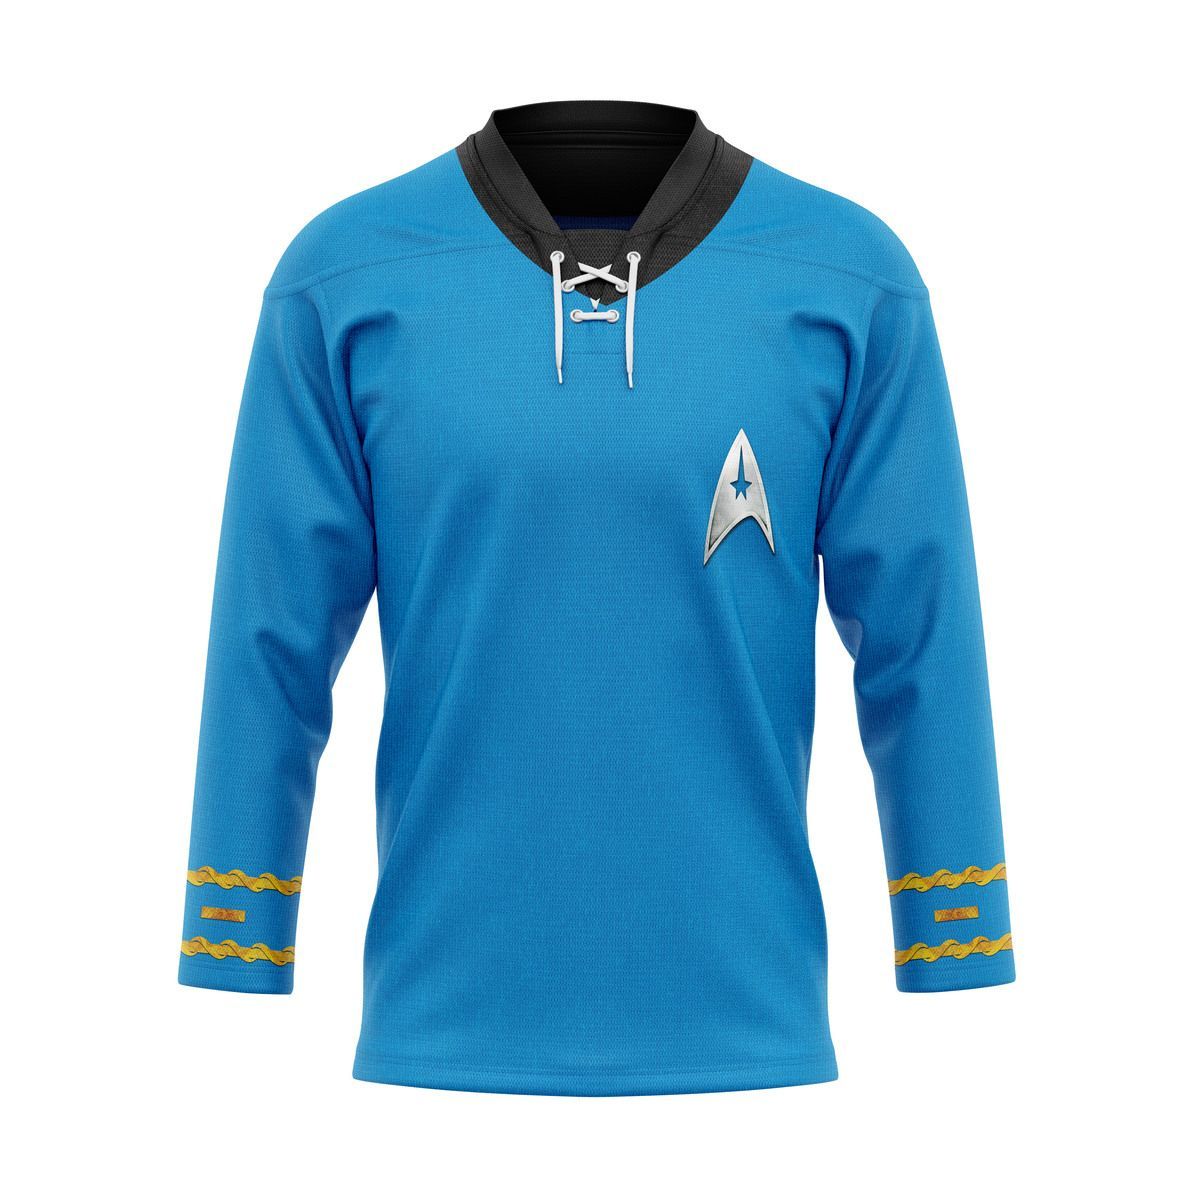 Top cool Hockey jersey for fan You can buy online. 77